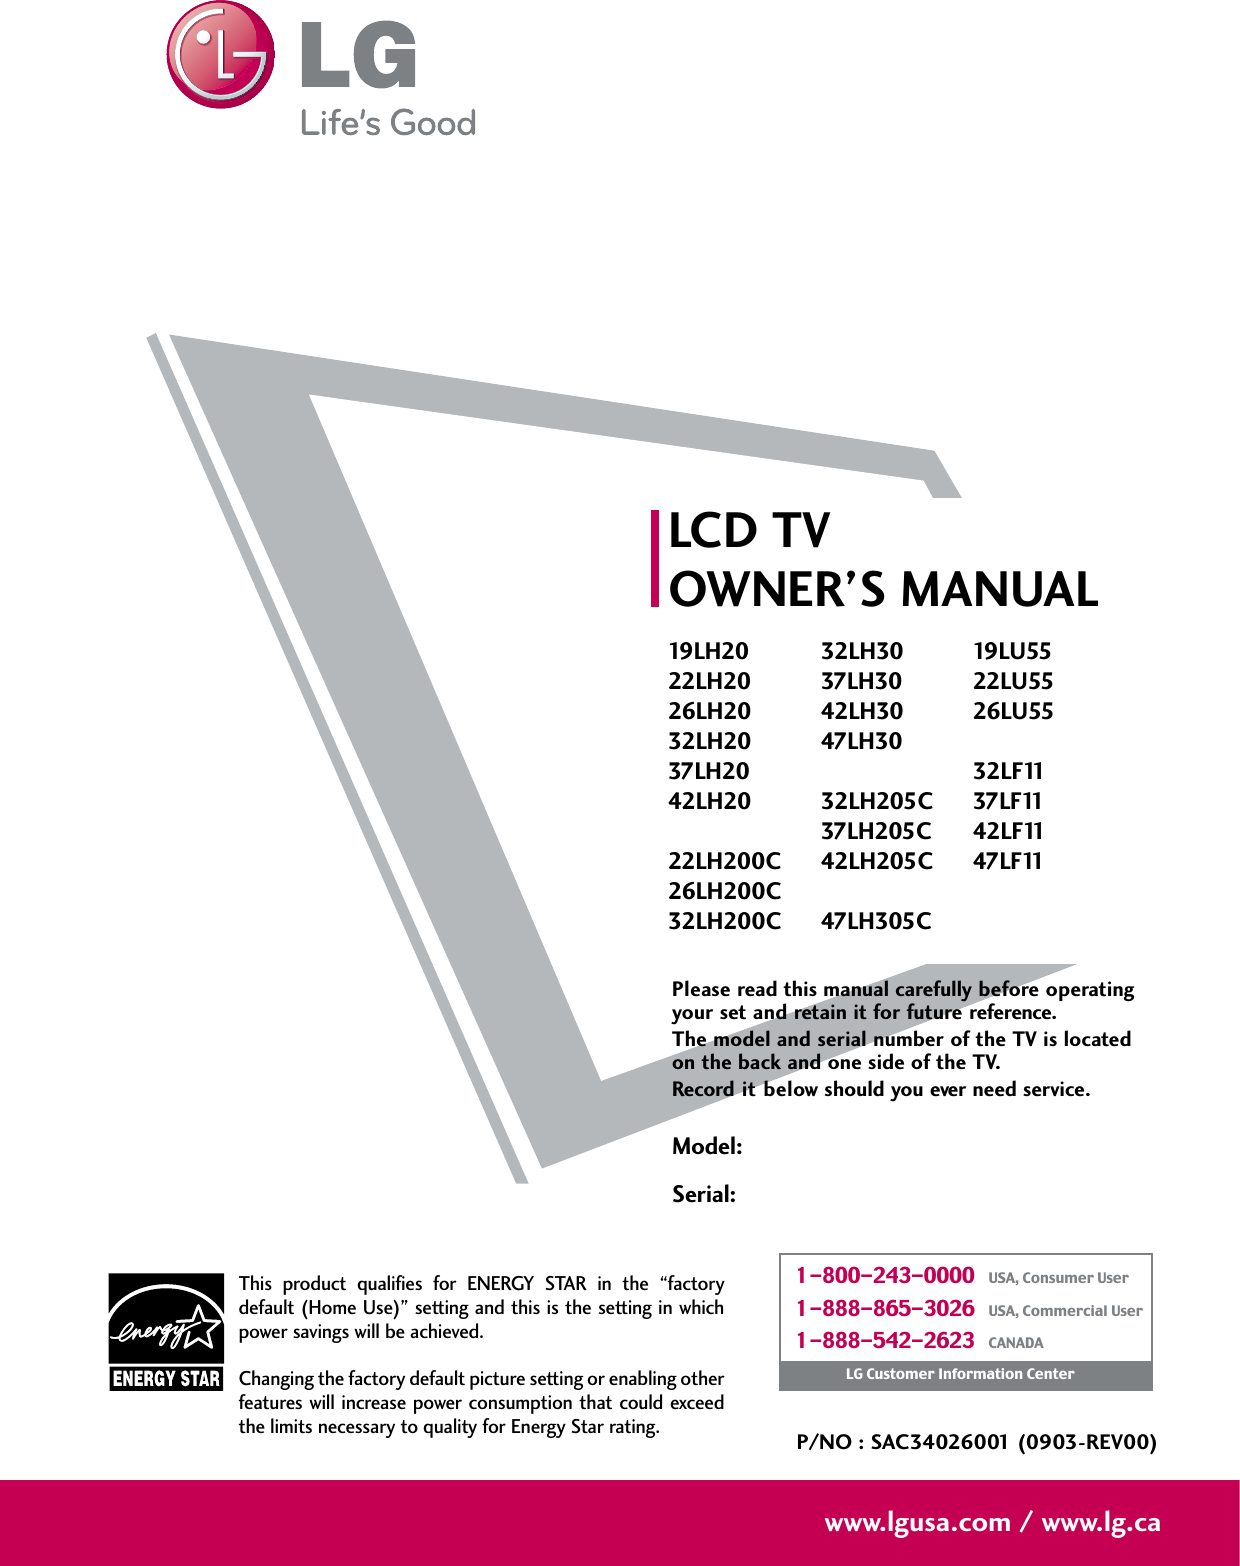 Please read this manual carefully before operatingyour set and retain it for future reference.The model and serial number of the TV is locatedon the back and one side of the TV. Record it below should you ever need service.Model:Serial:LCD TVOWNER’S MANUAL19LH2022LH2026LH2032LH2037LH2042LH2022LH200C26LH200C32LH200C32LH3037LH3042LH3047LH3032LH205C37LH205C42LH205C47LH305C19LU5522LU5526LU5532LF1137LF1142LF1147LF11P/NO : SAC34026001 (0903-REV00)www.lgusa.com / www.lg.caThis  product  qualifies  for  ENERGY  STAR  in  the  “factorydefault (Home Use)” setting and this is the setting in whichpower savings will be achieved.Changing the factory default picture setting or enabling otherfeatures will increase power consumption that could exceedthe limits necessary to quality for Energy Star rating.1-800-243-0000   USA, Consumer User1-888-865-3026   USA, Commercial User1-888-542-2623   CANADALG Customer Information Center